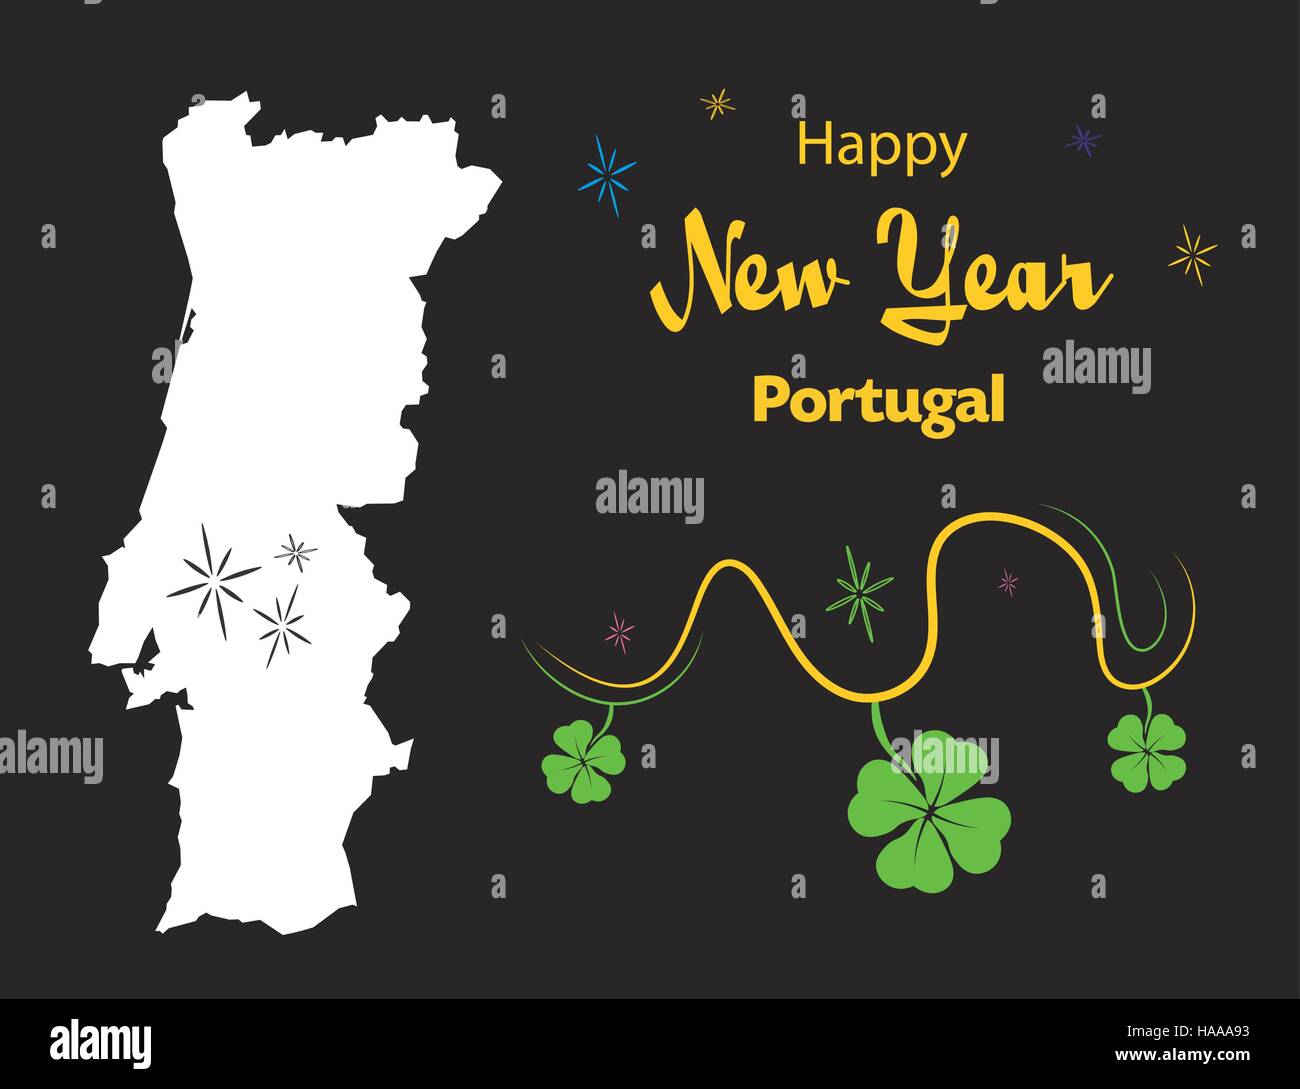 Happy New Year illustration theme with map of Portugal Stock Vector